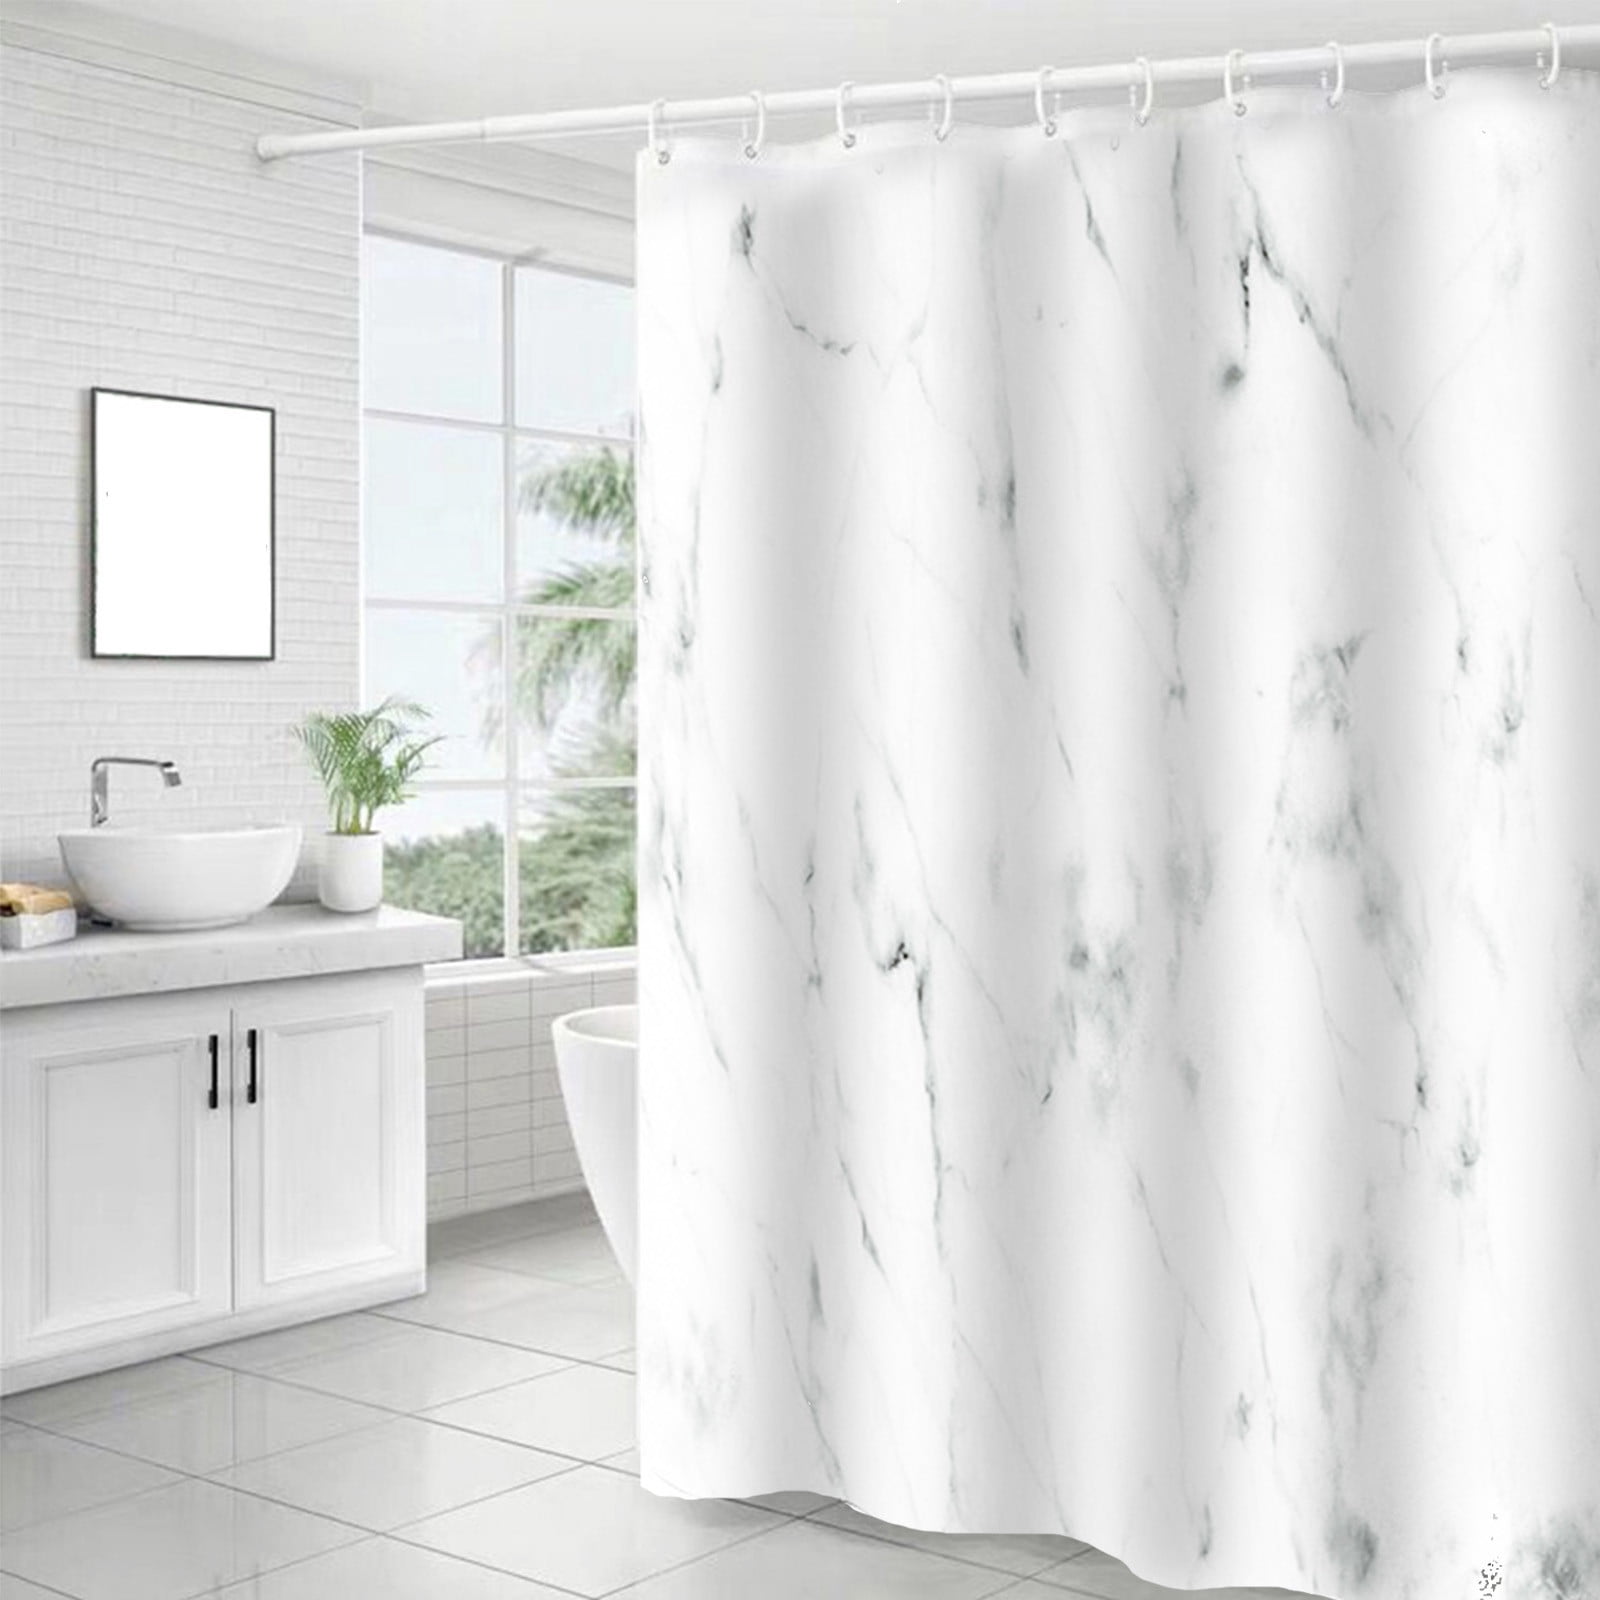 QISIWOLE Marble Bathroom Shower Curtain,Grey and White Fabric Shower  Curtain with Hooks,Unique 3D Printing,Decorative Bathroom Accessories,Water